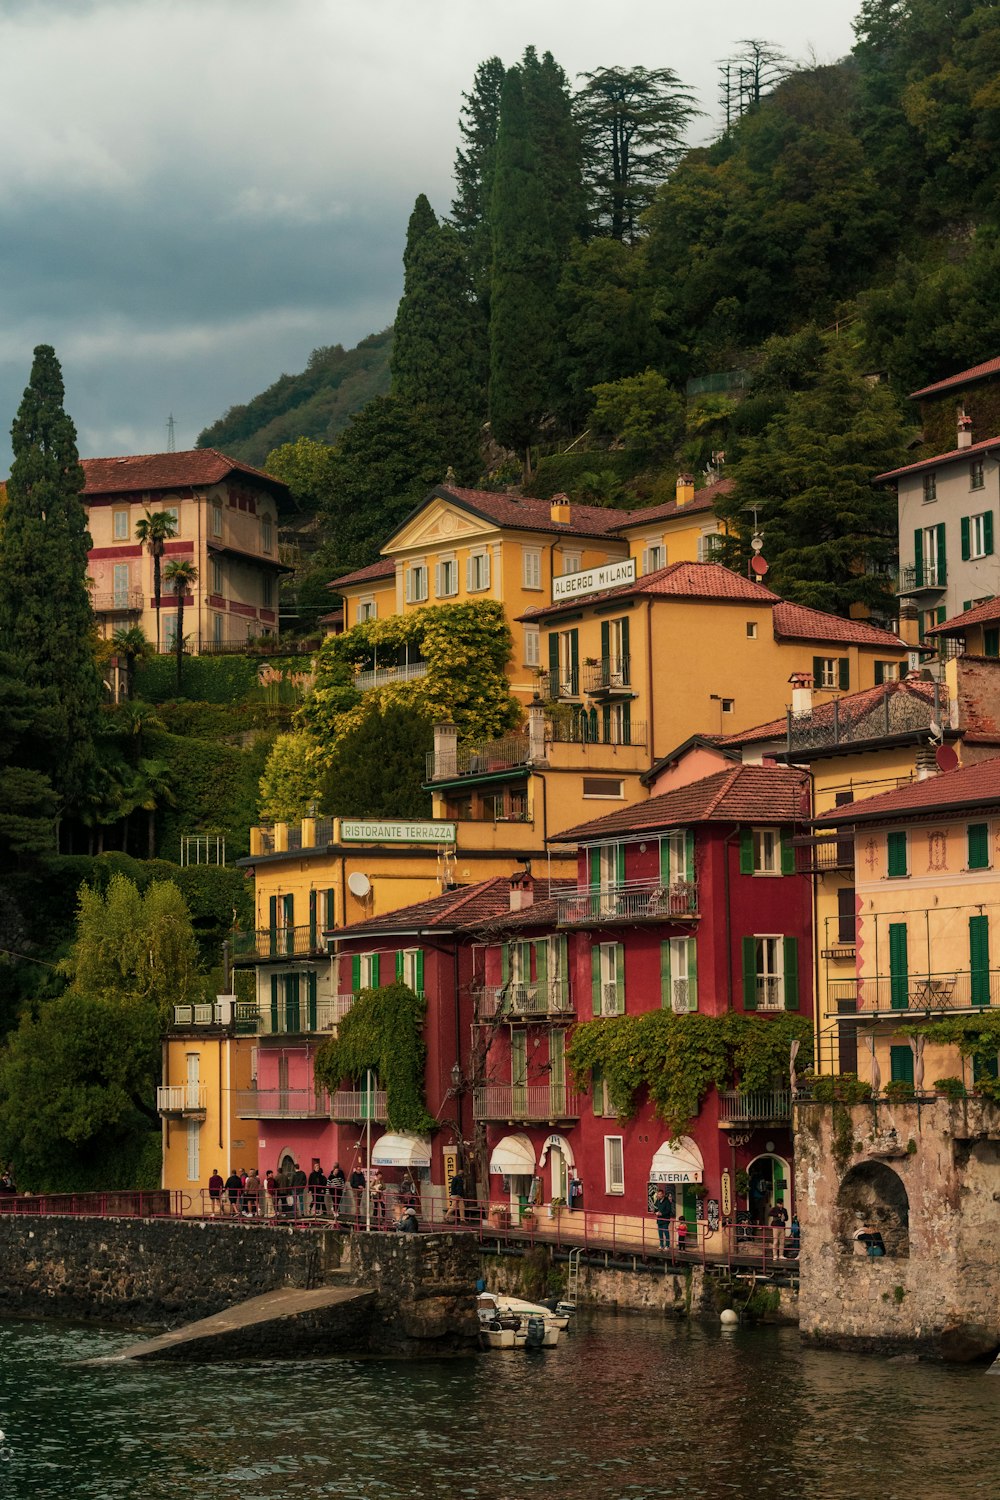 a row of houses on a hillside next to a body of water